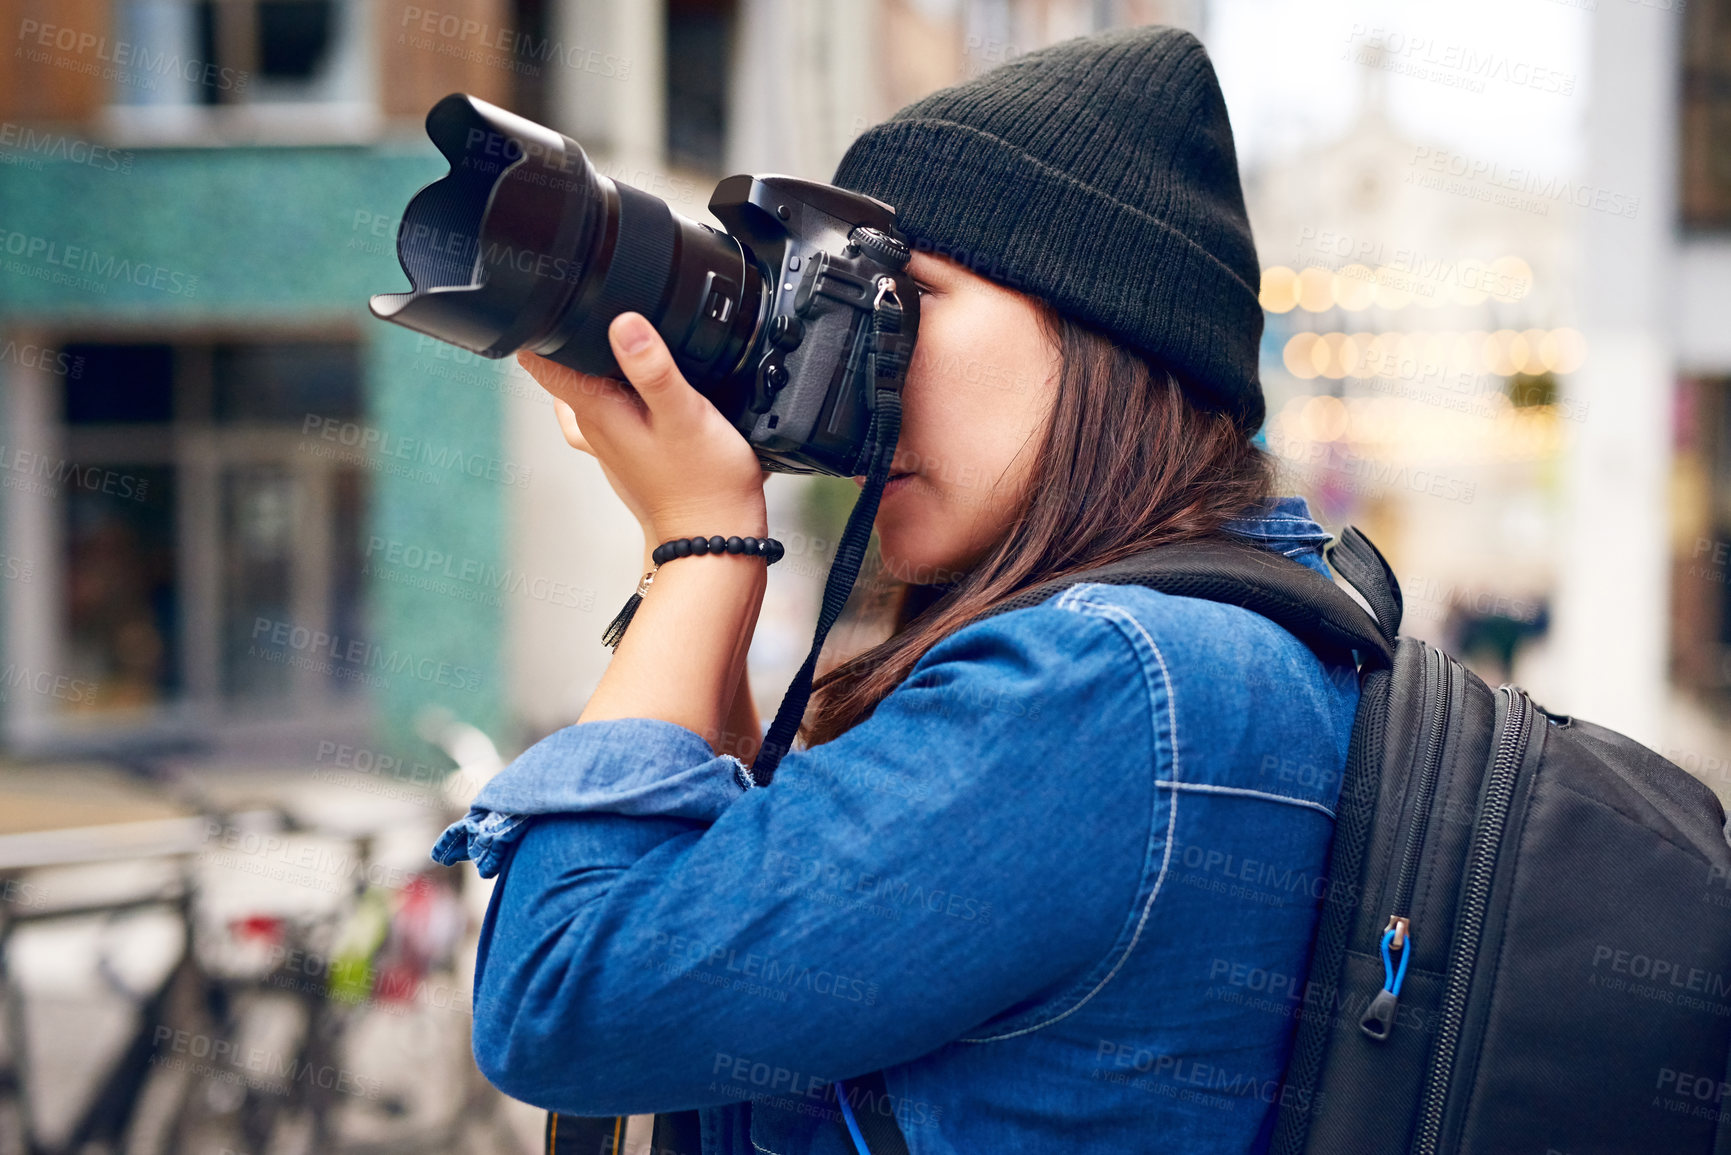 Buy stock photo Shot of a woman taking pictures with her camera outside 